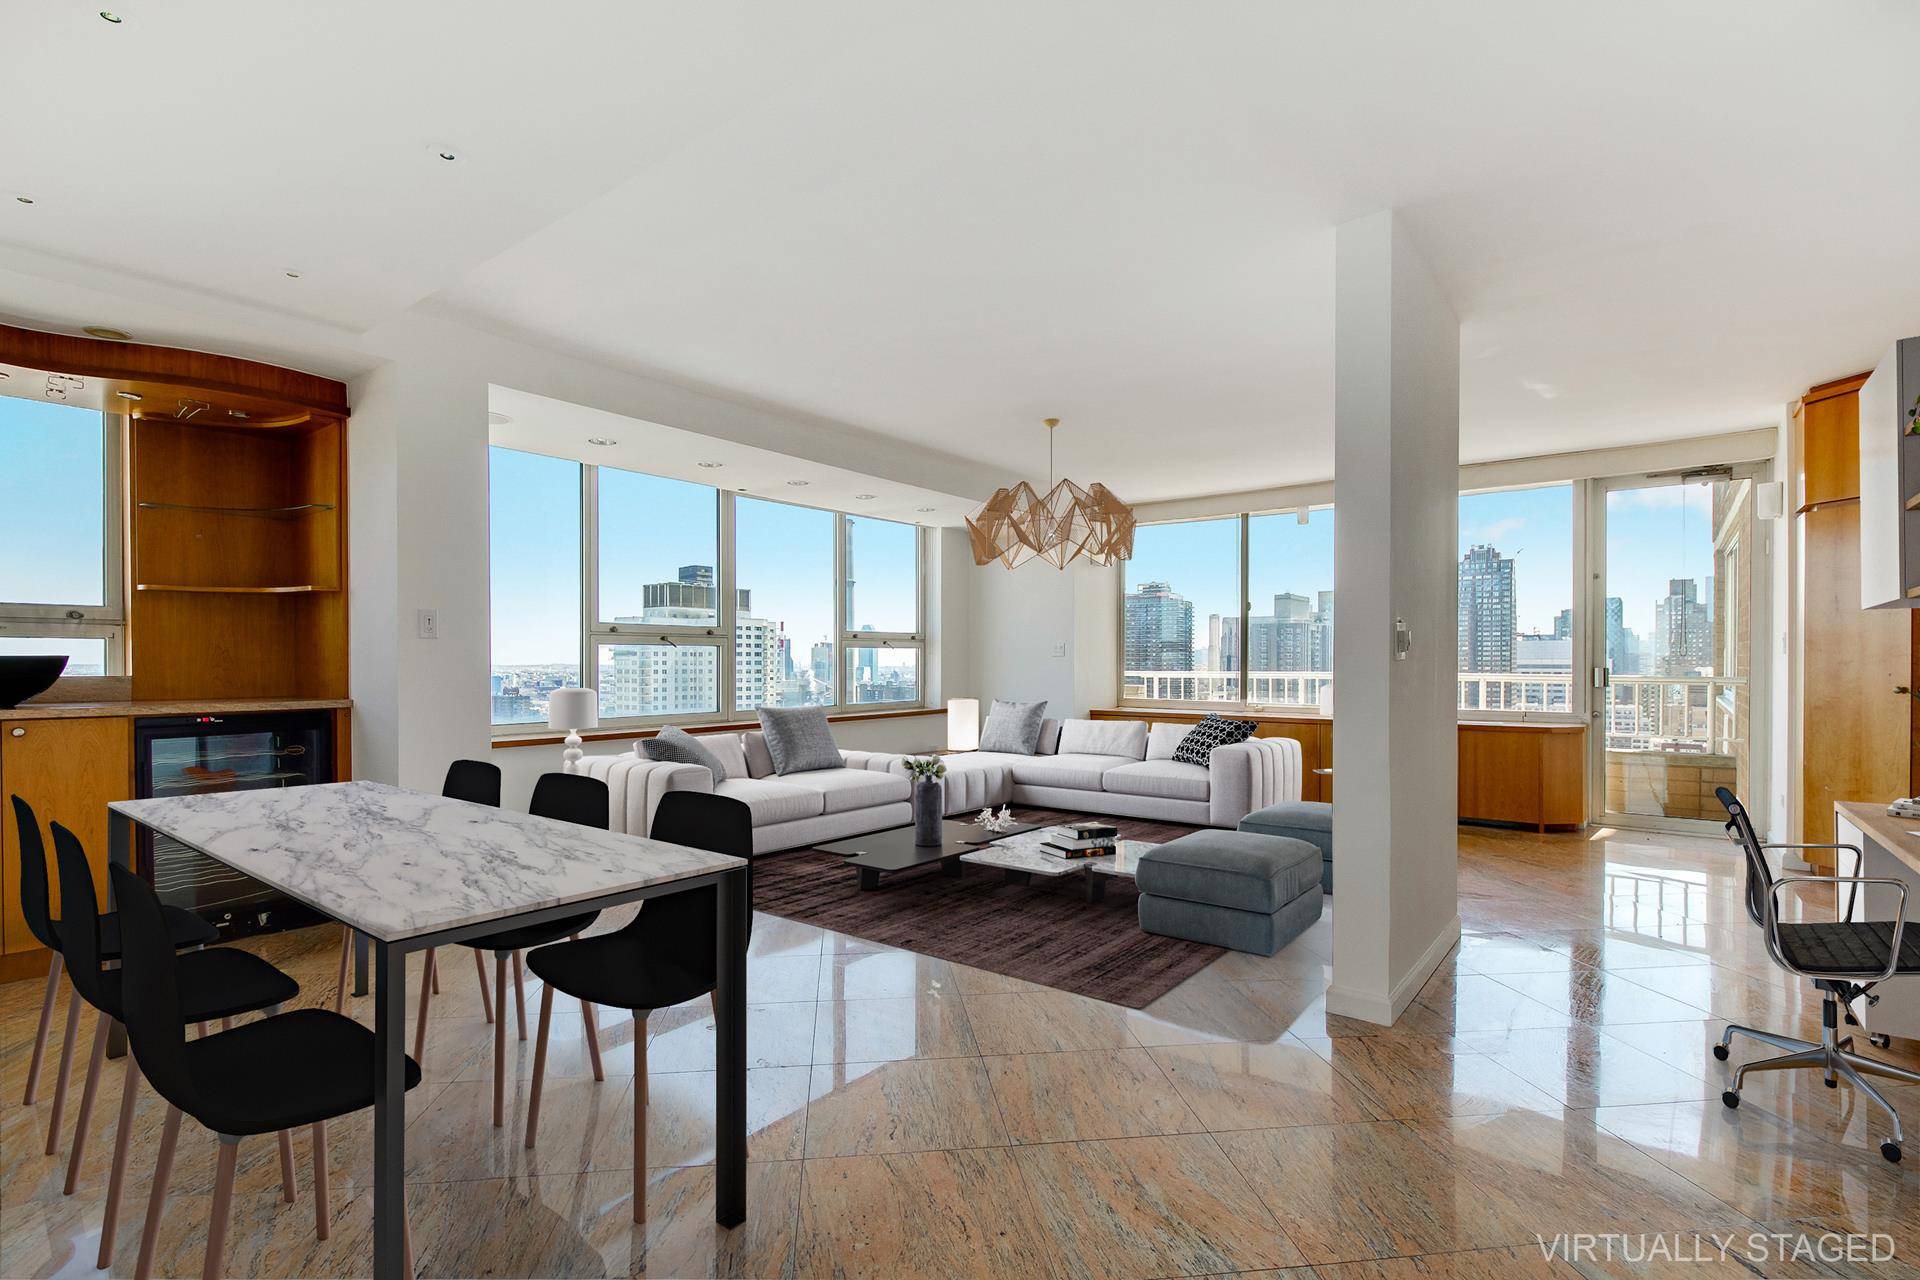 Oversized 4 bedroom 2 bath apartment with triple exposure and open city views.